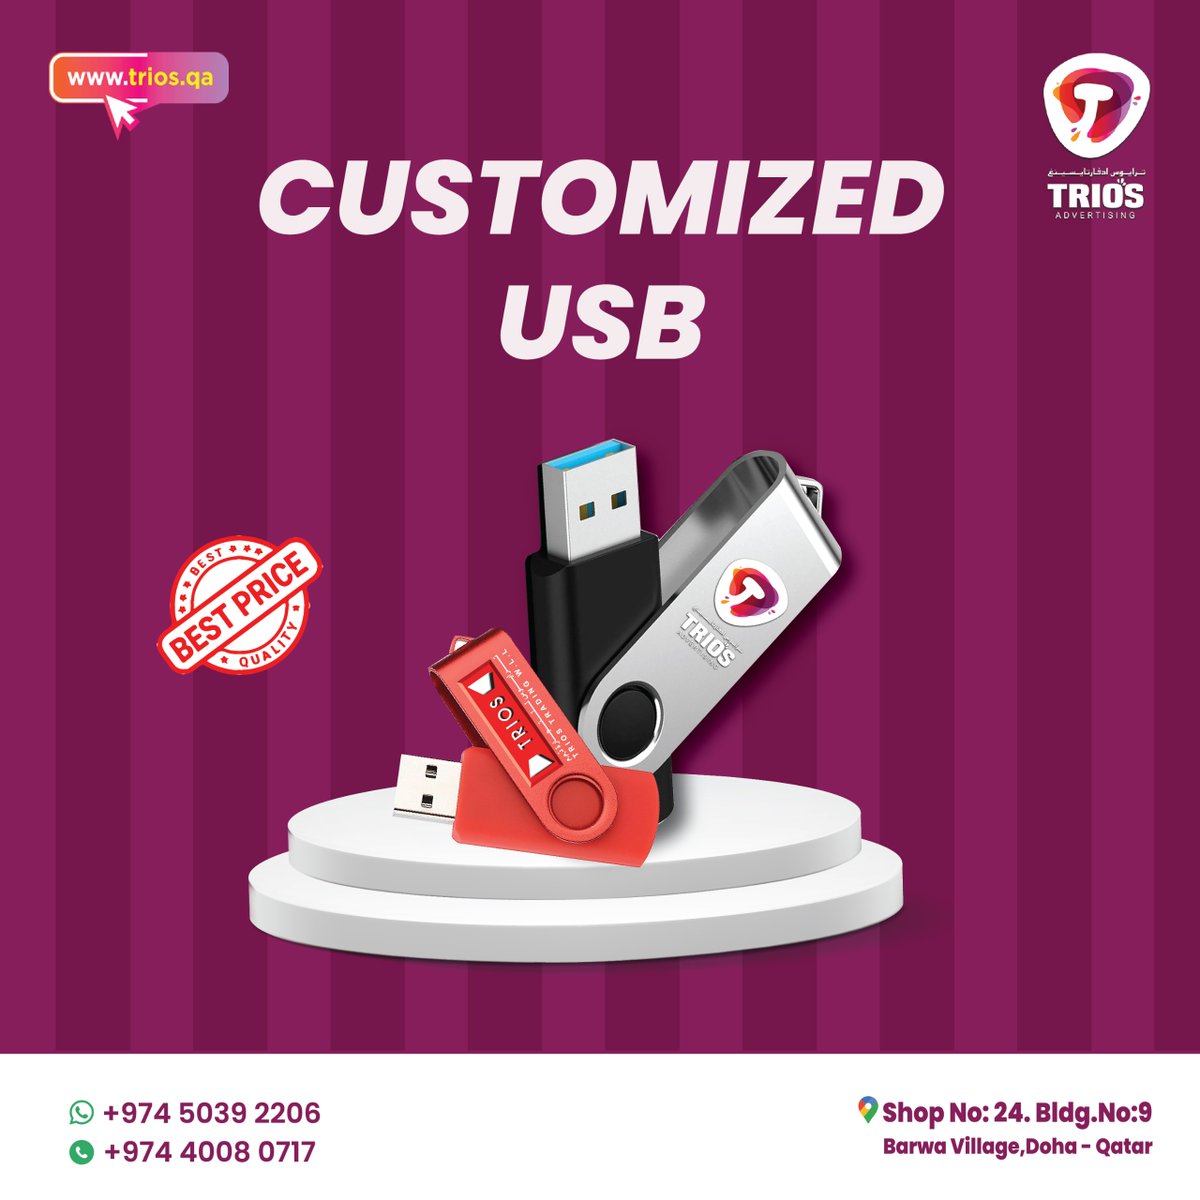 Trios Advertising: Where quality meets creativity! 🎨🔥 We specialize in customized printing for USB drives. 
.
.
👉trios.qa
.
.
#printingpress #printingshop #printing #printingservice #printingservices #printingindustry #printingsolutions #printingbusiness